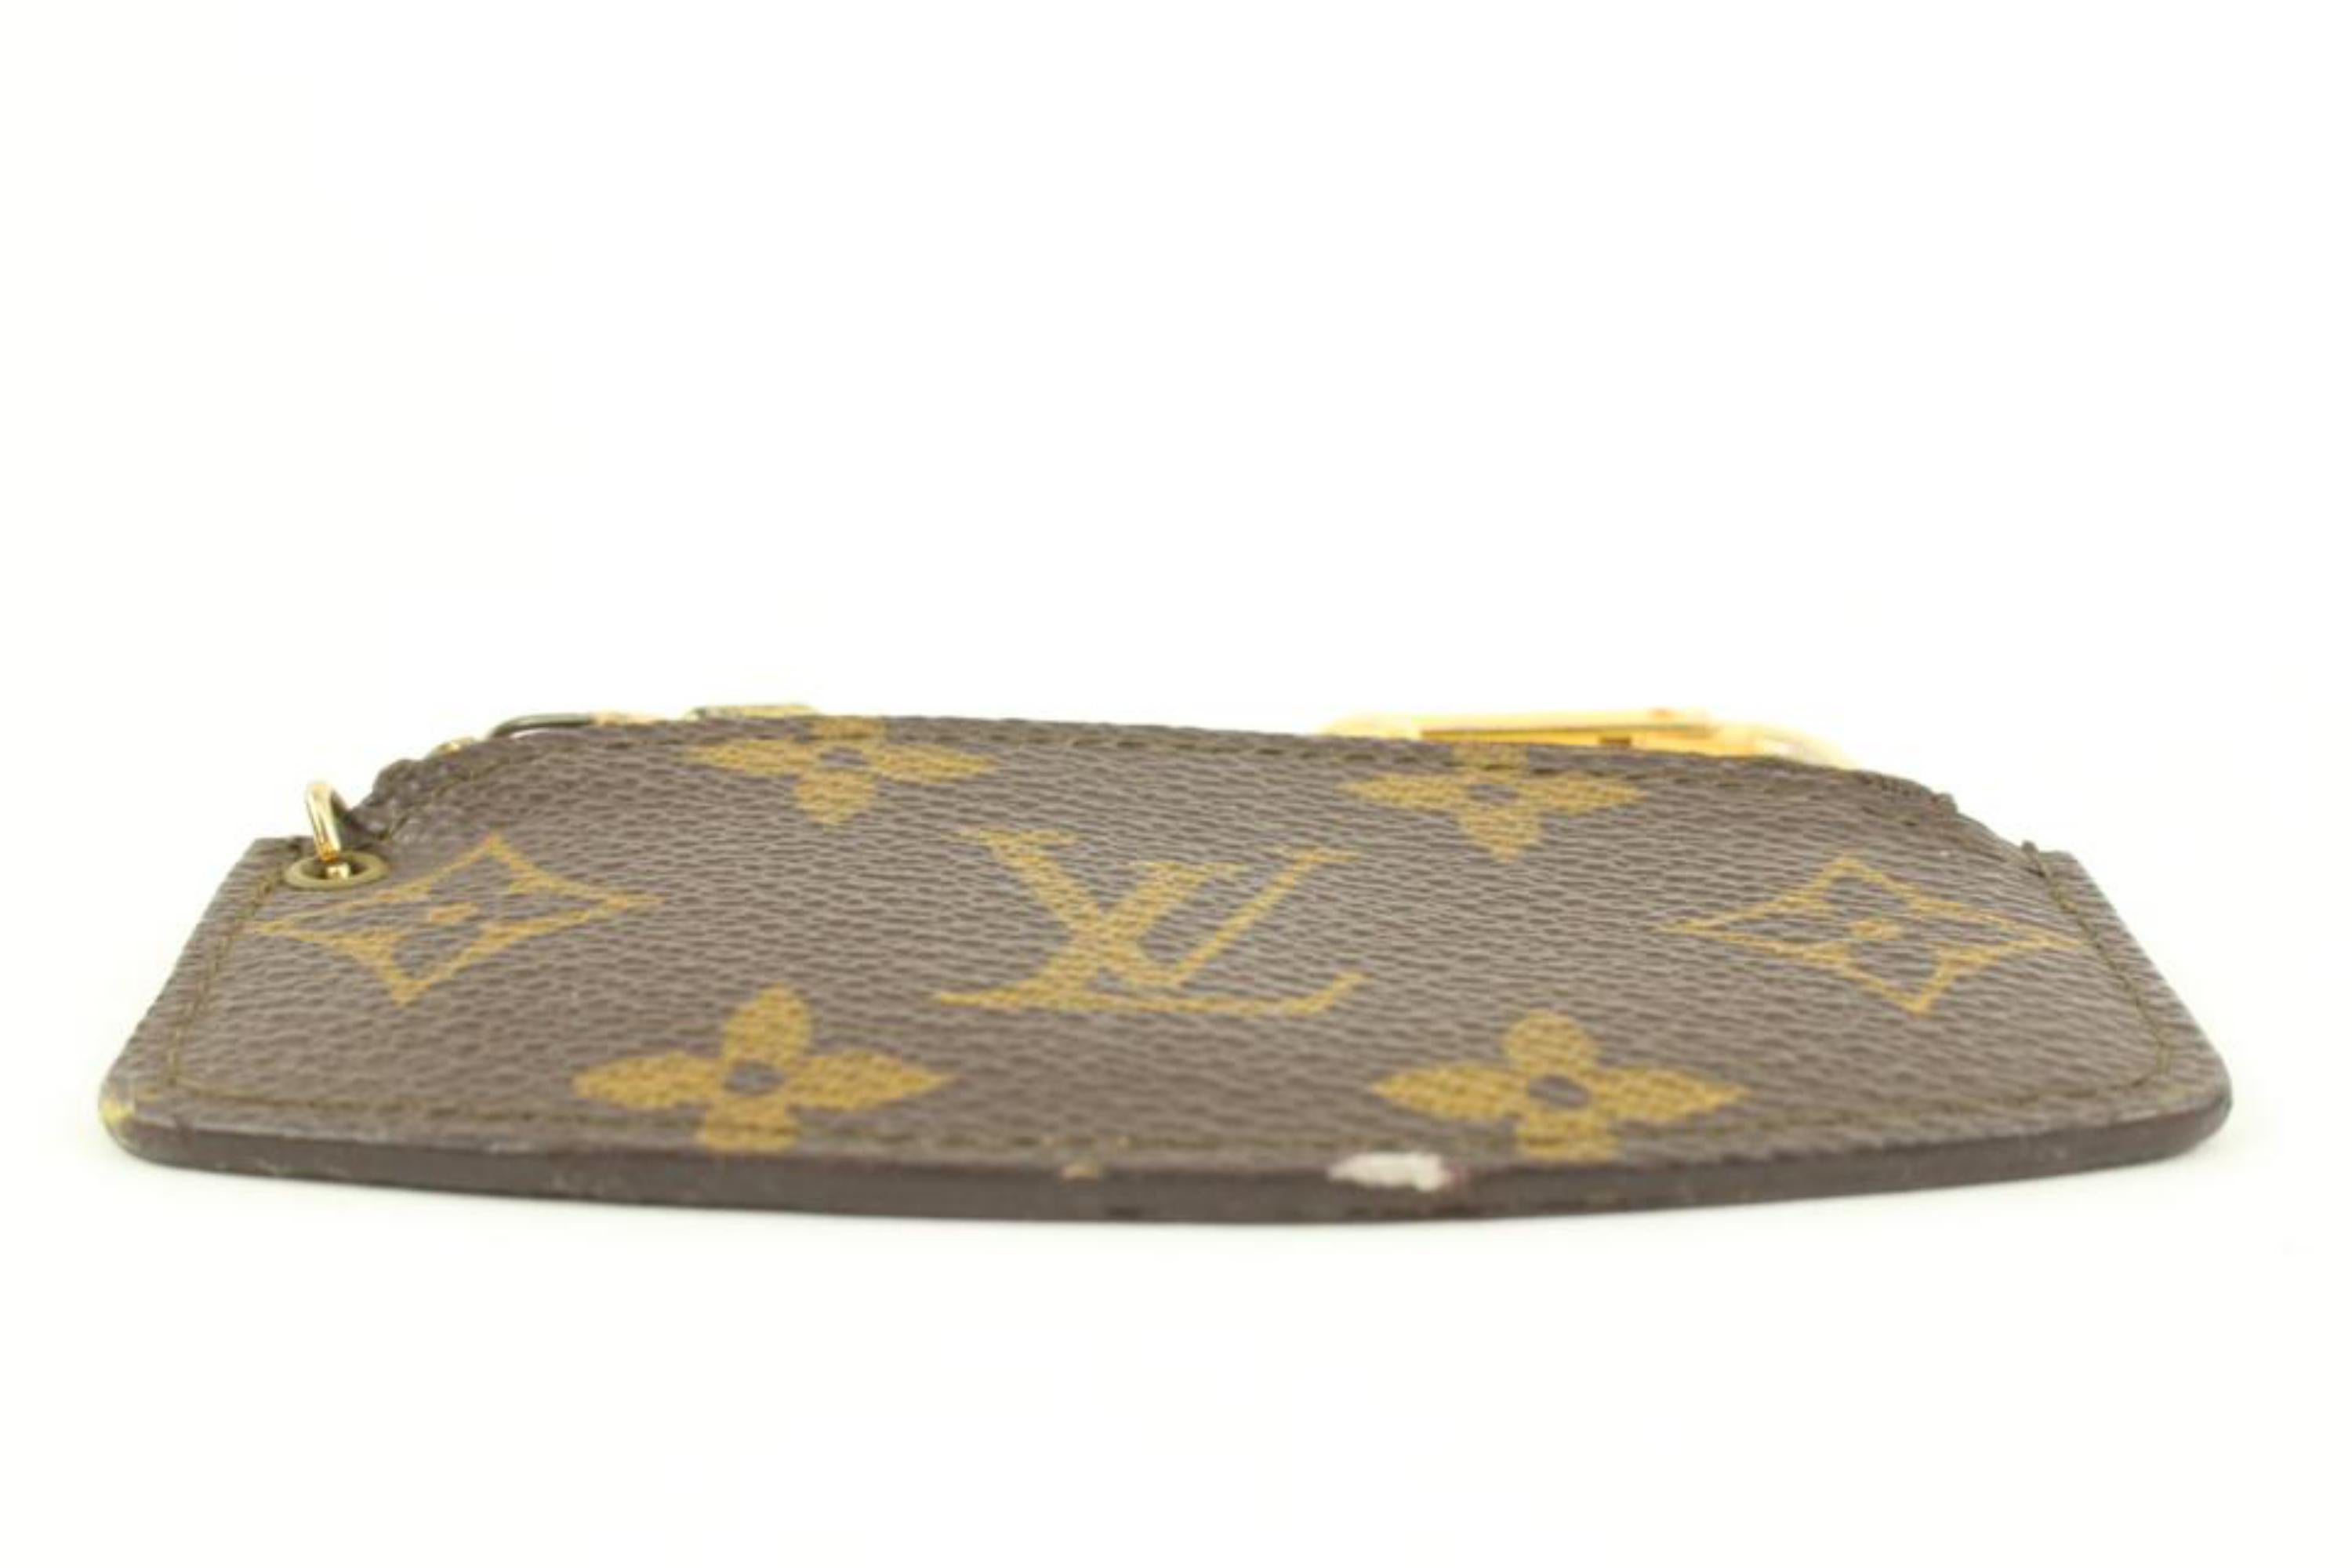 Louis Vuitton Ultra Rare Vintage Monogram Key Pouch Vintage Pochette Cles 15lv31 In Fair Condition For Sale In Dix hills, NY